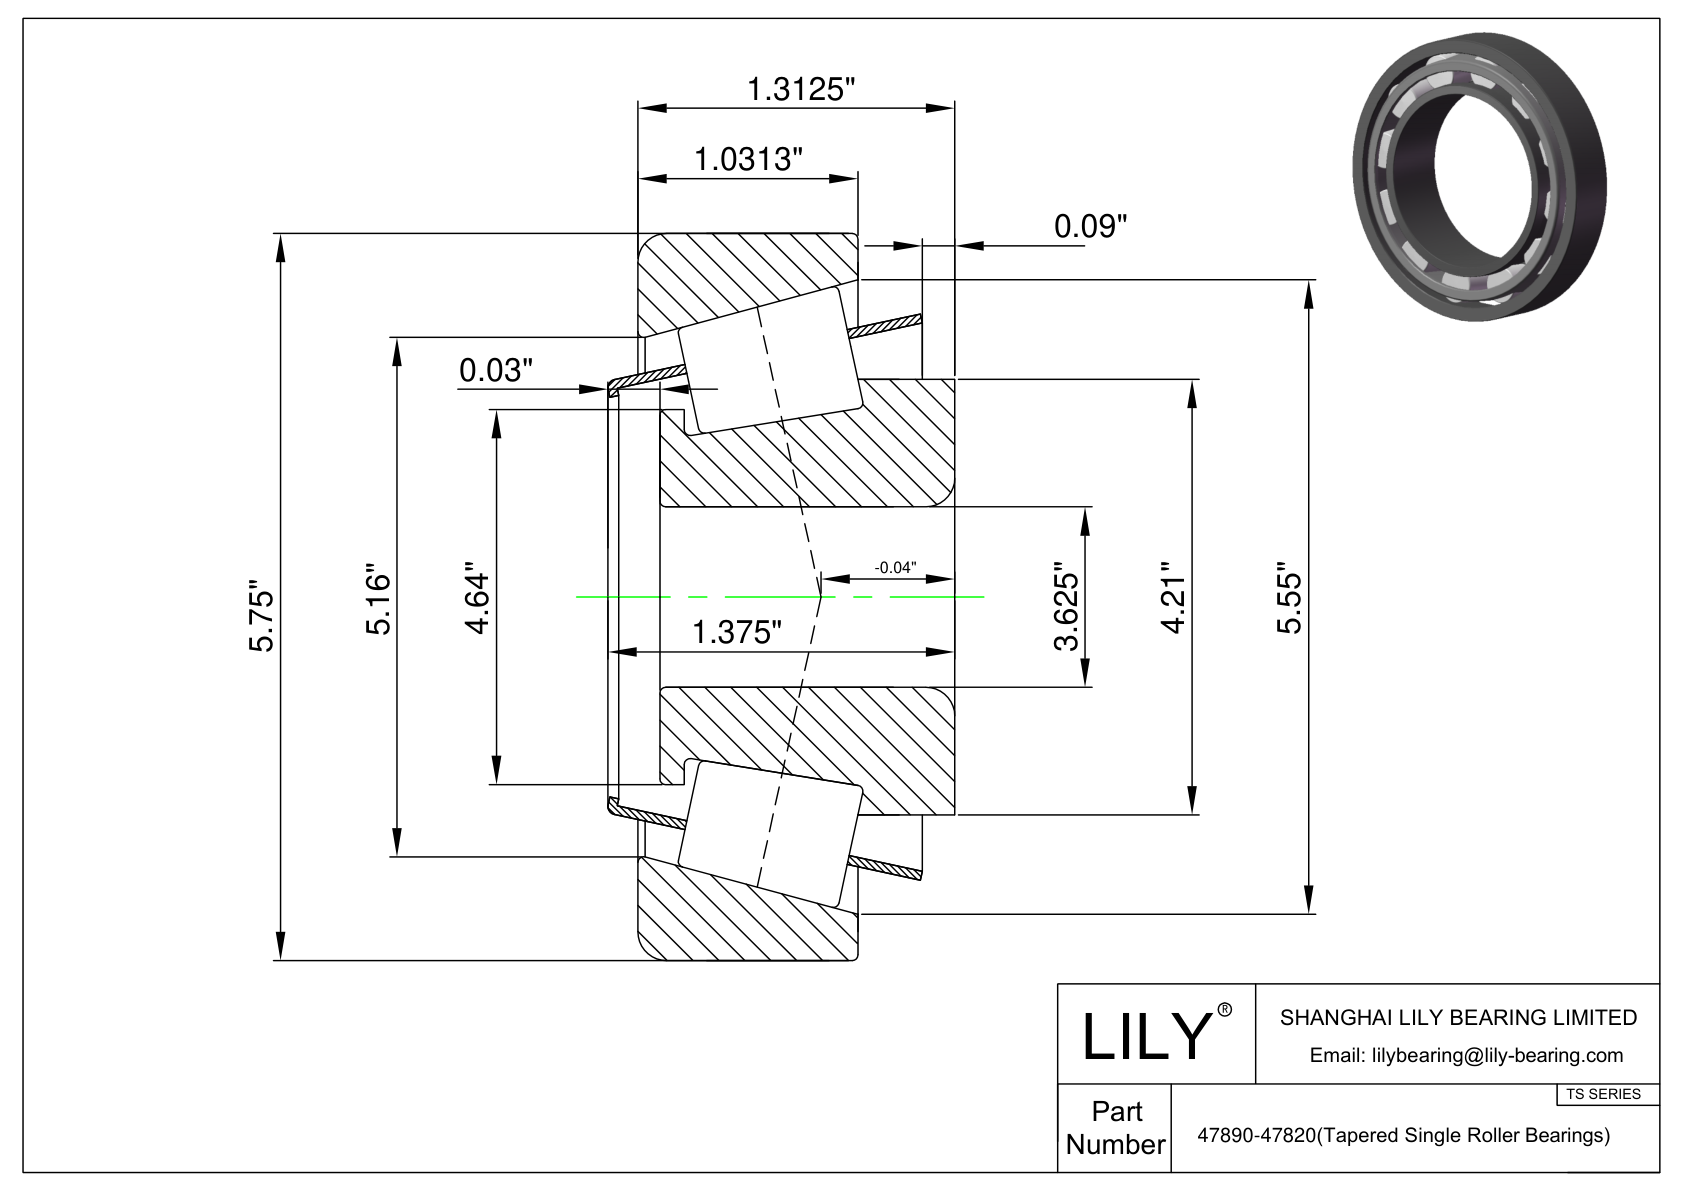 47890-47820 TS (Tapered Single Roller Bearings) (Imperial) cad drawing